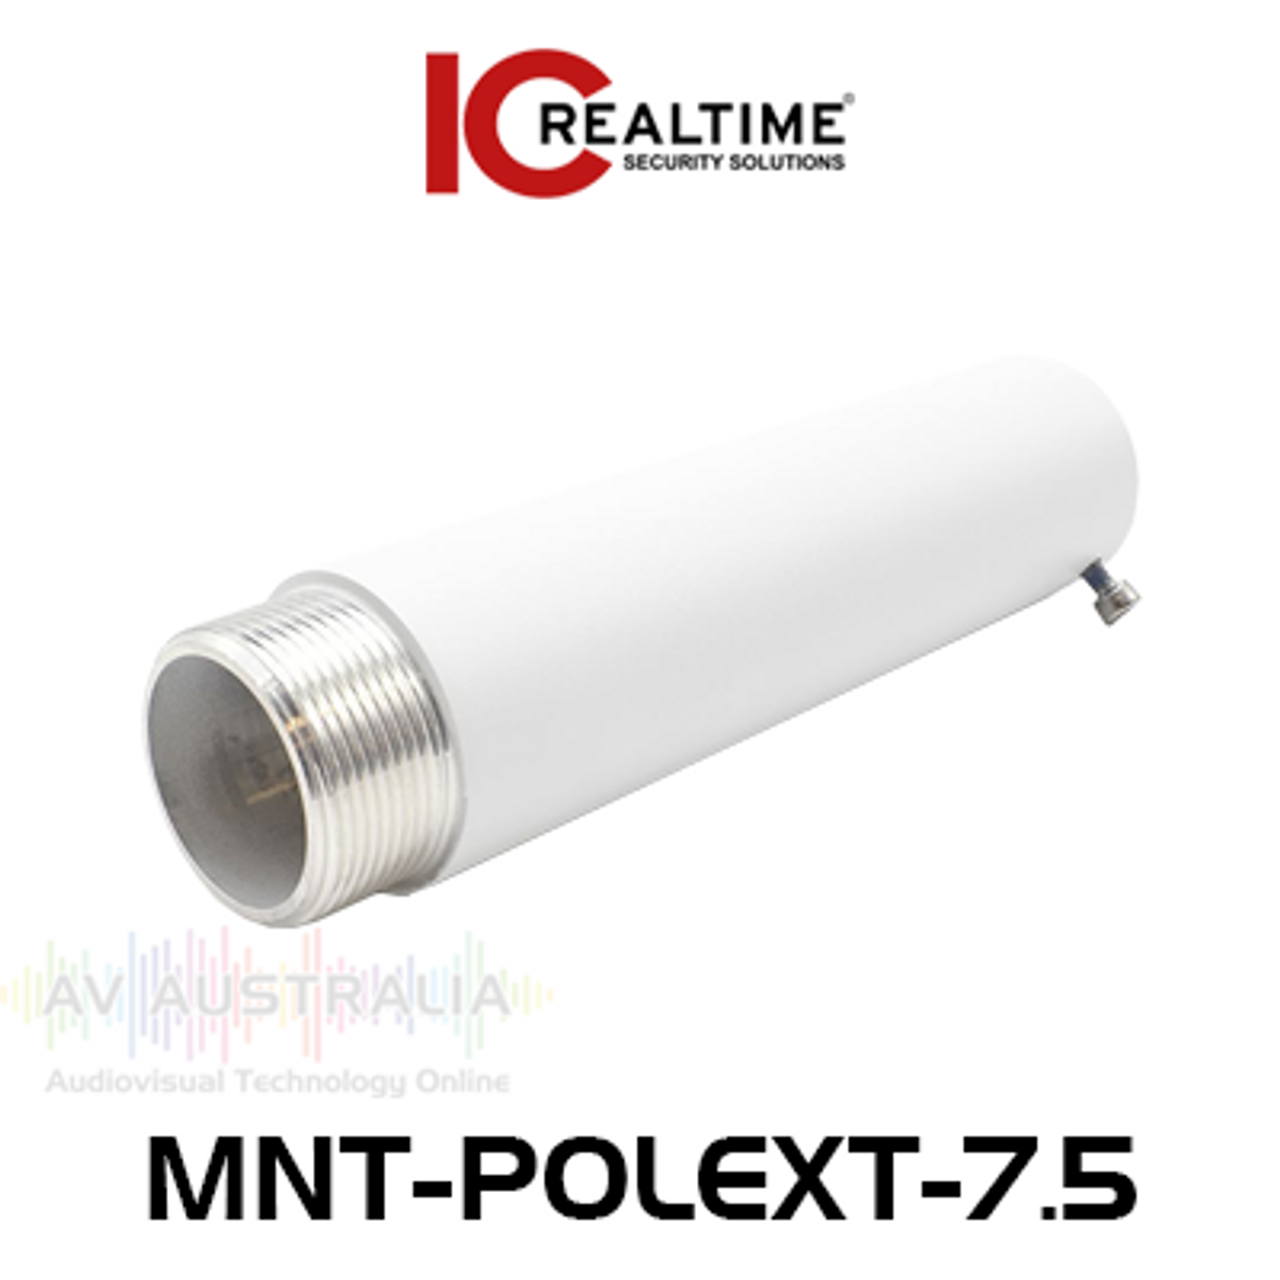 IC Realtime 7.5" Extension Pole with 1.5" Threads